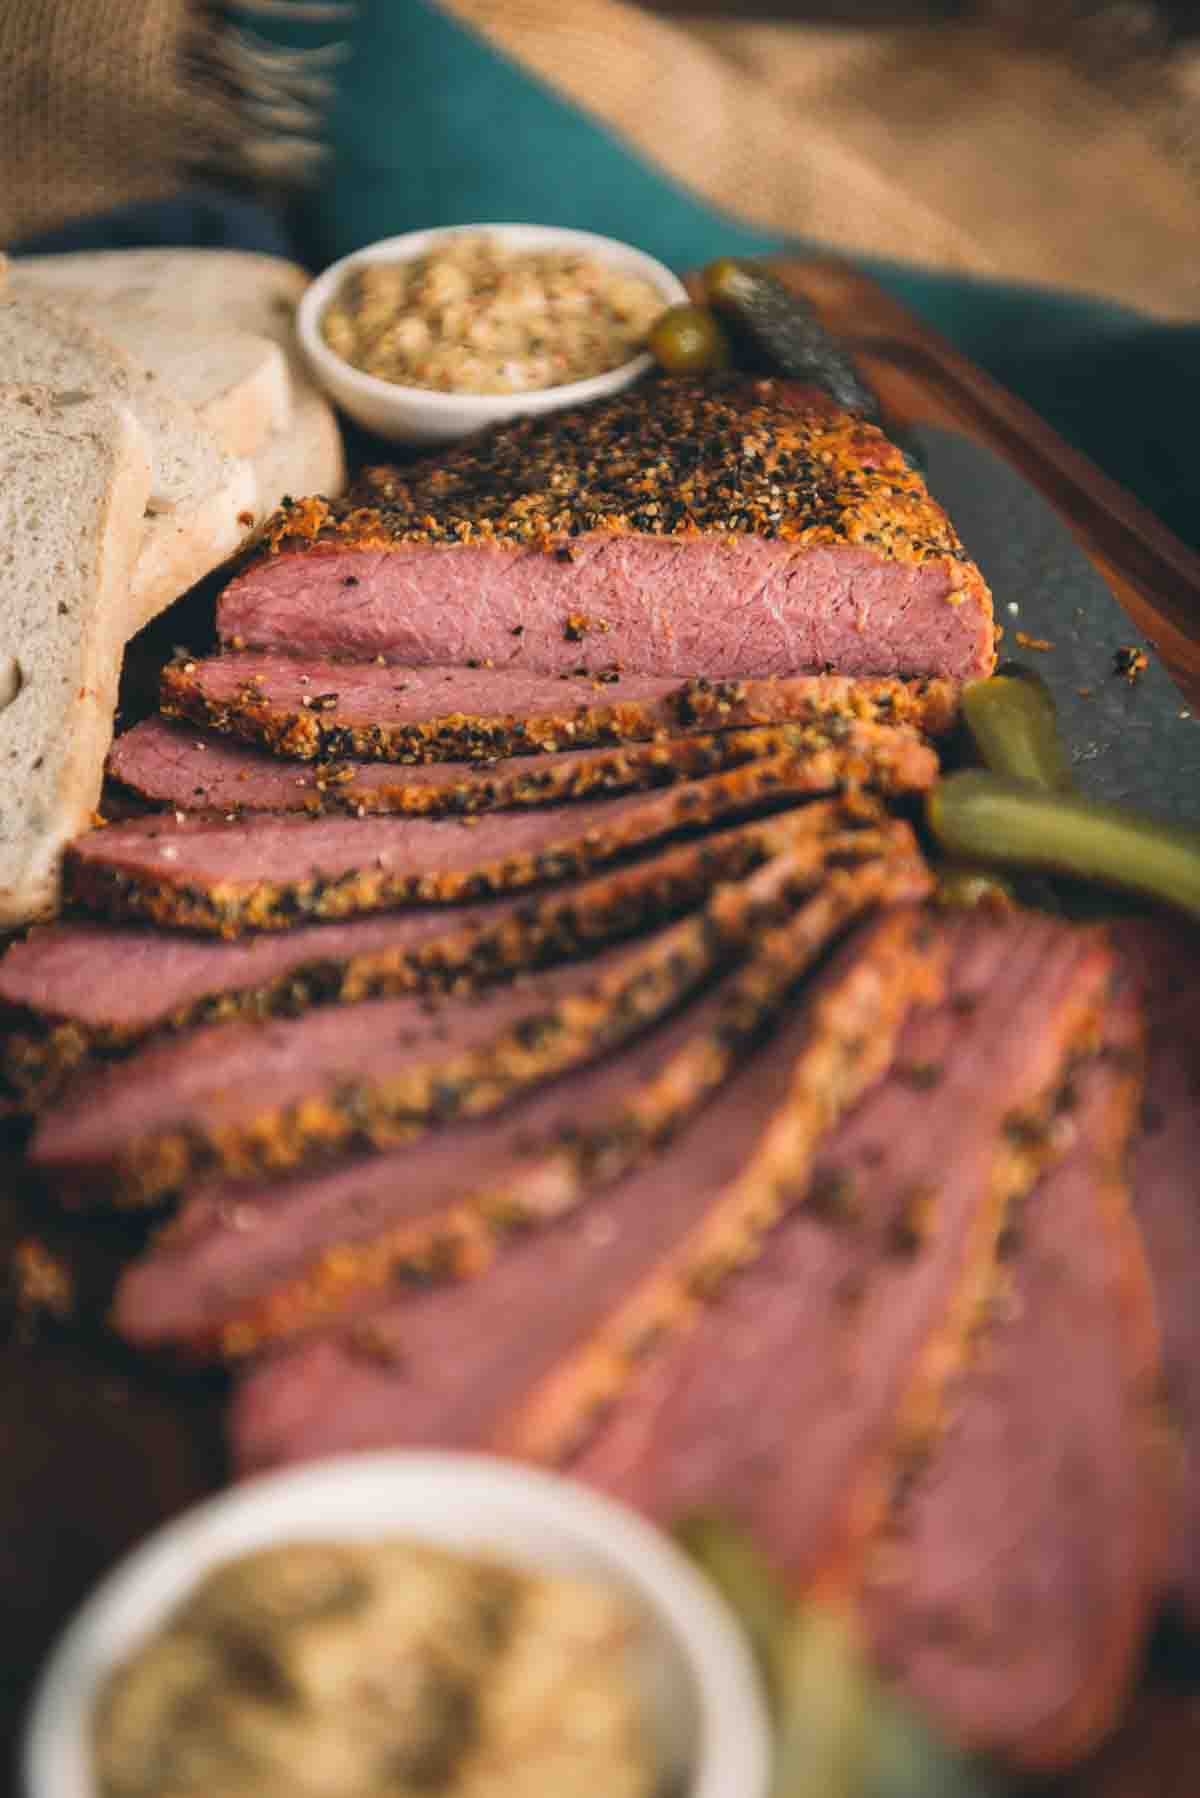 Close up showing the coarse pepper crust and pink slices of beef.